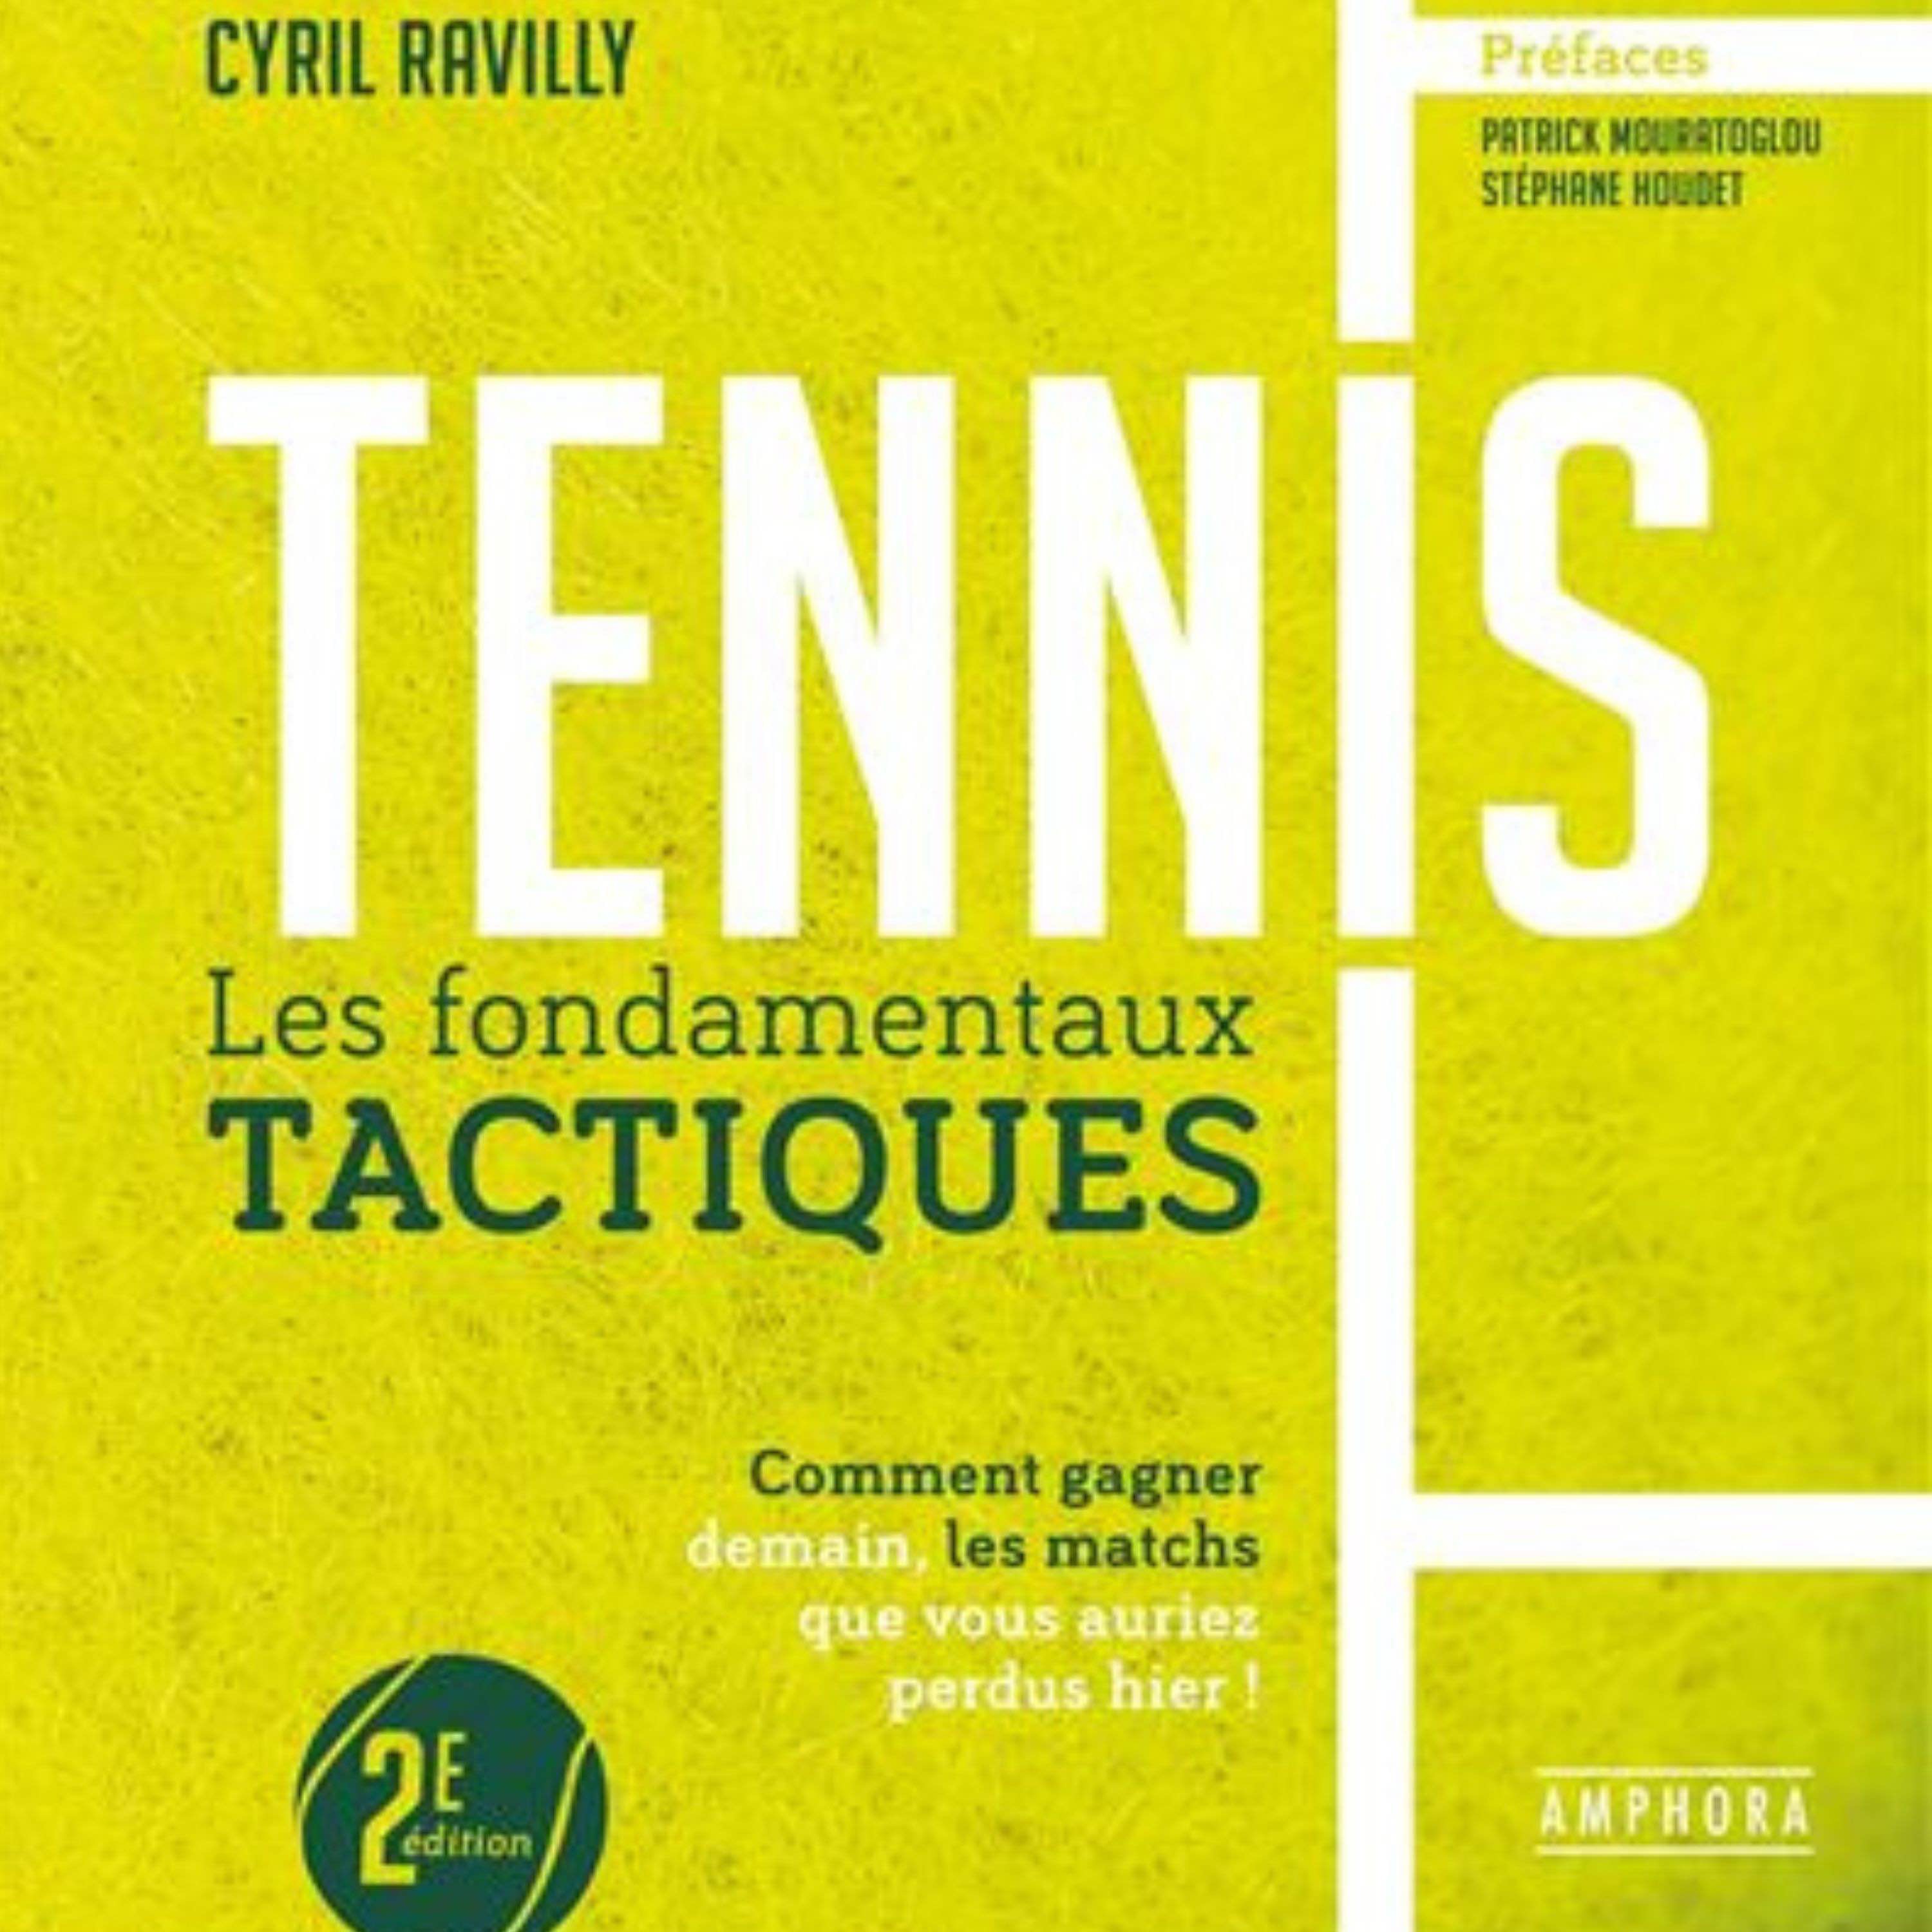 cover art for Gagne 2 classements en optimisant ta tactique - Cyril Ravilly 